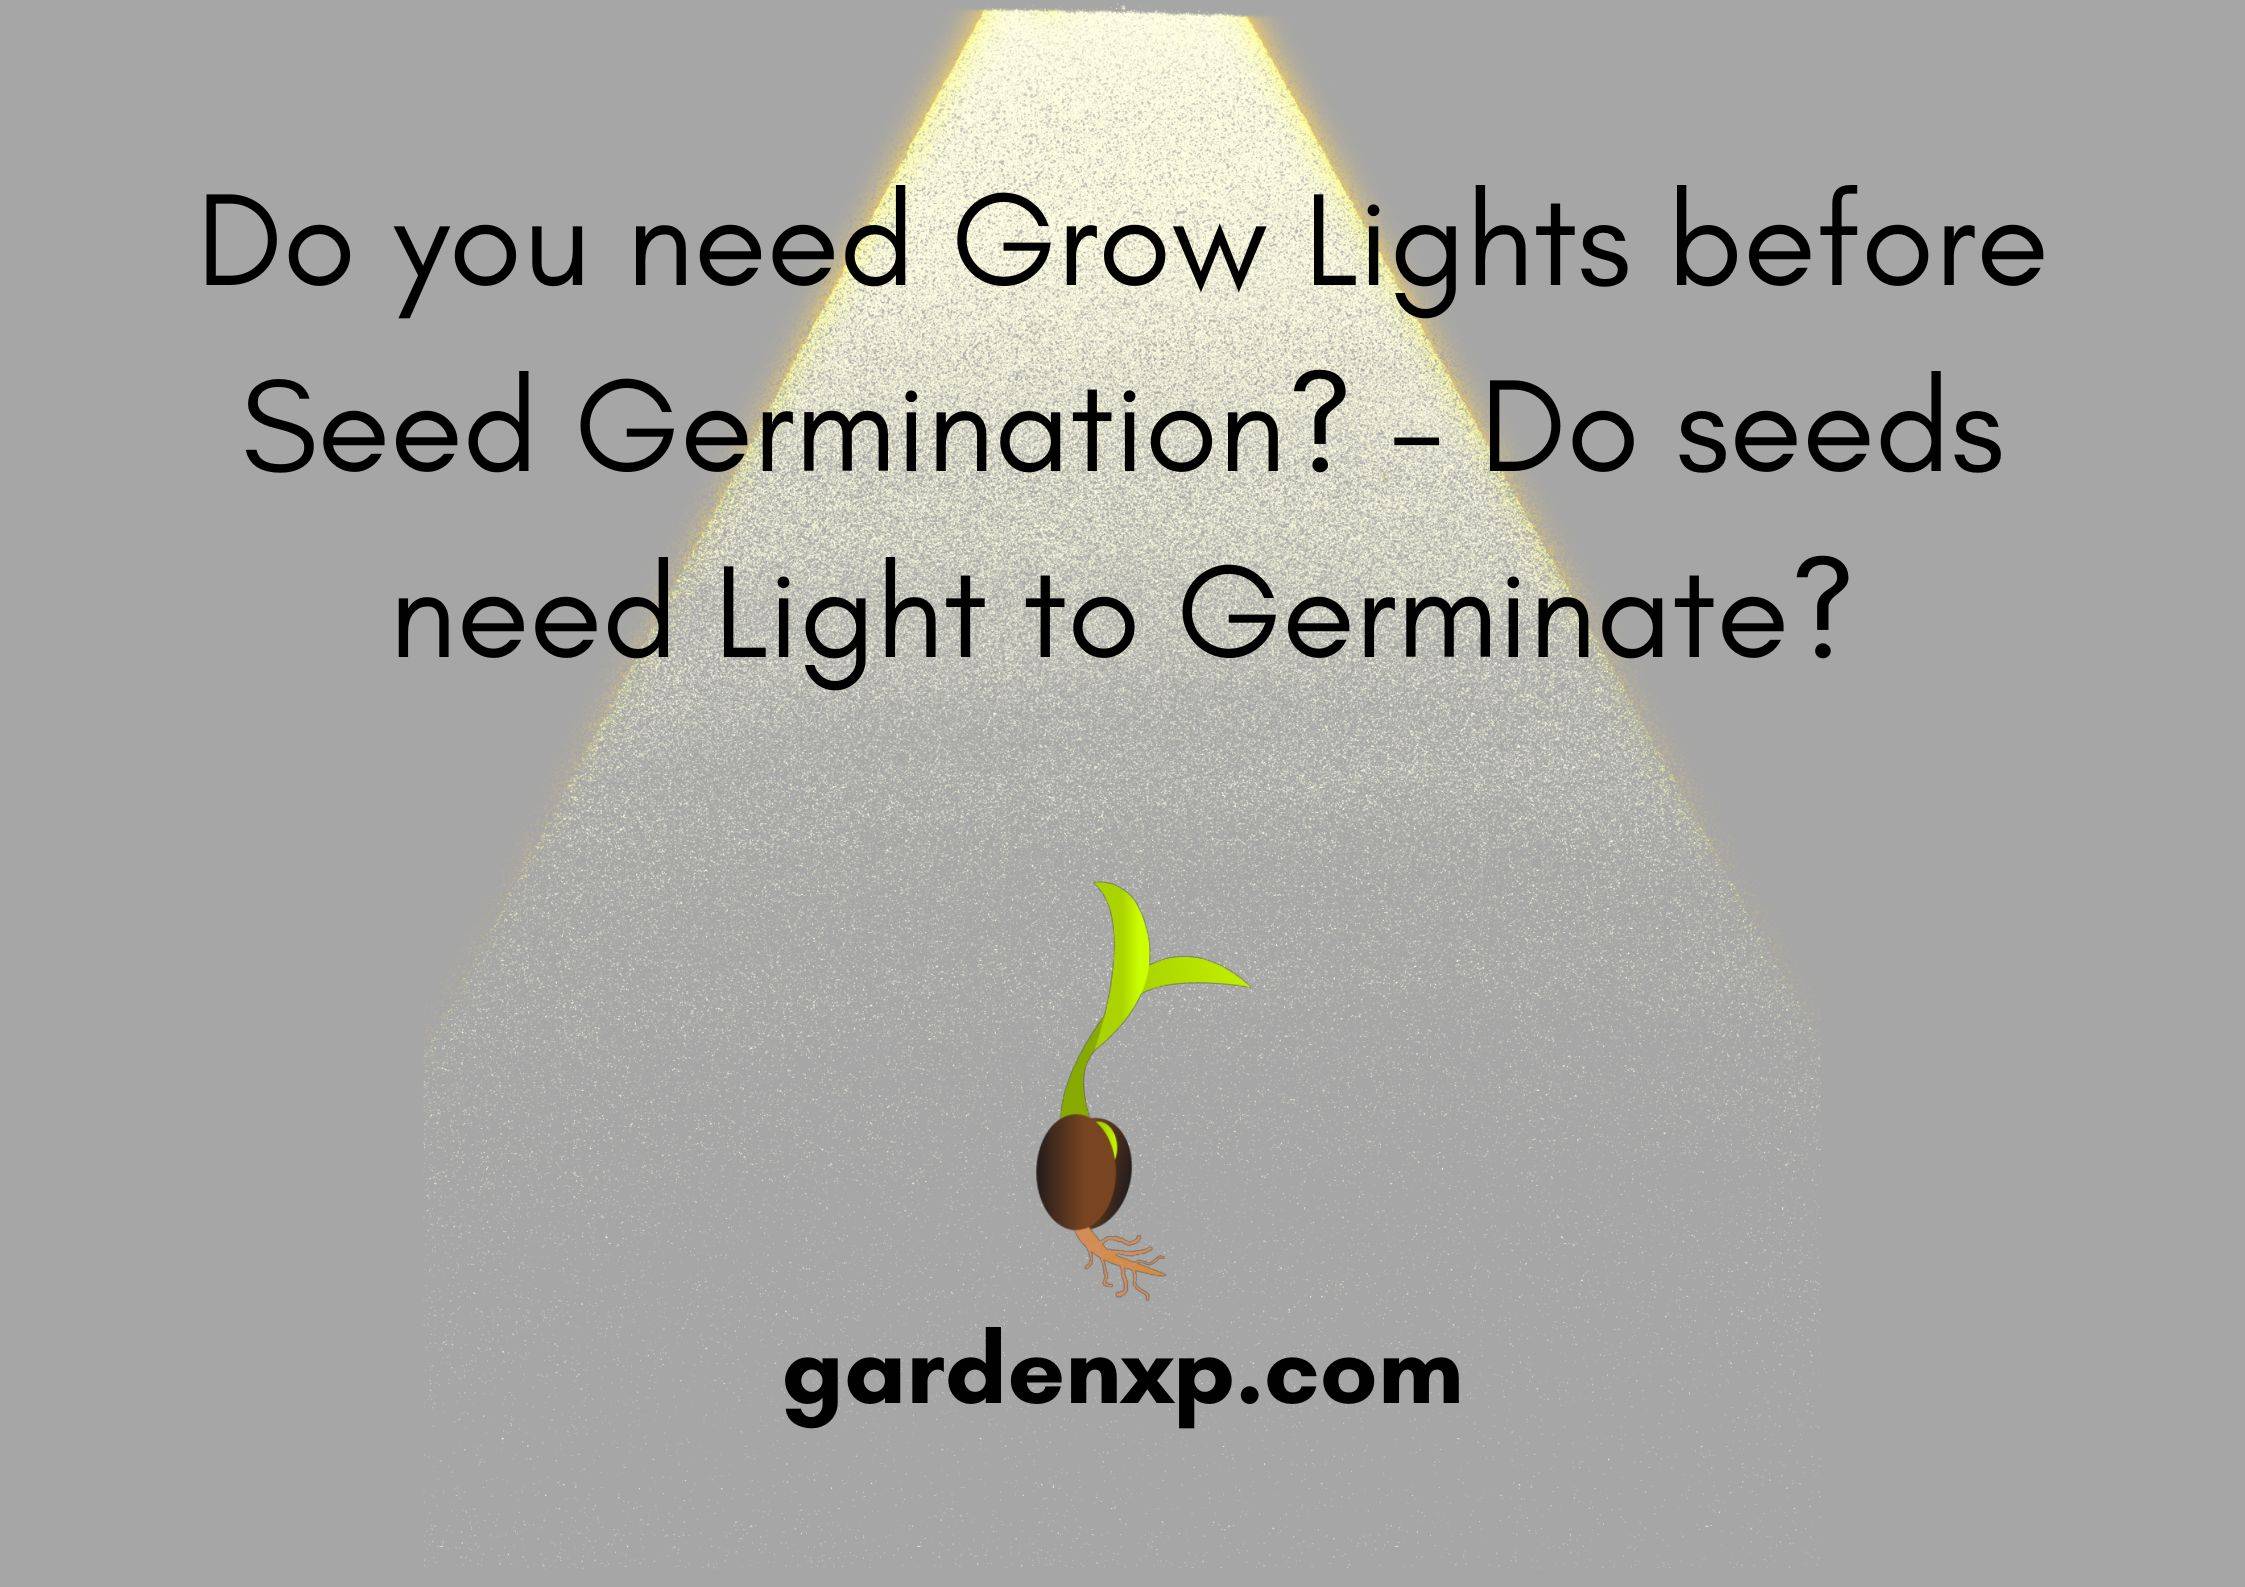 Do you need Grow Lights before Seed Germination?  - Do seeds need Light to Germinate?